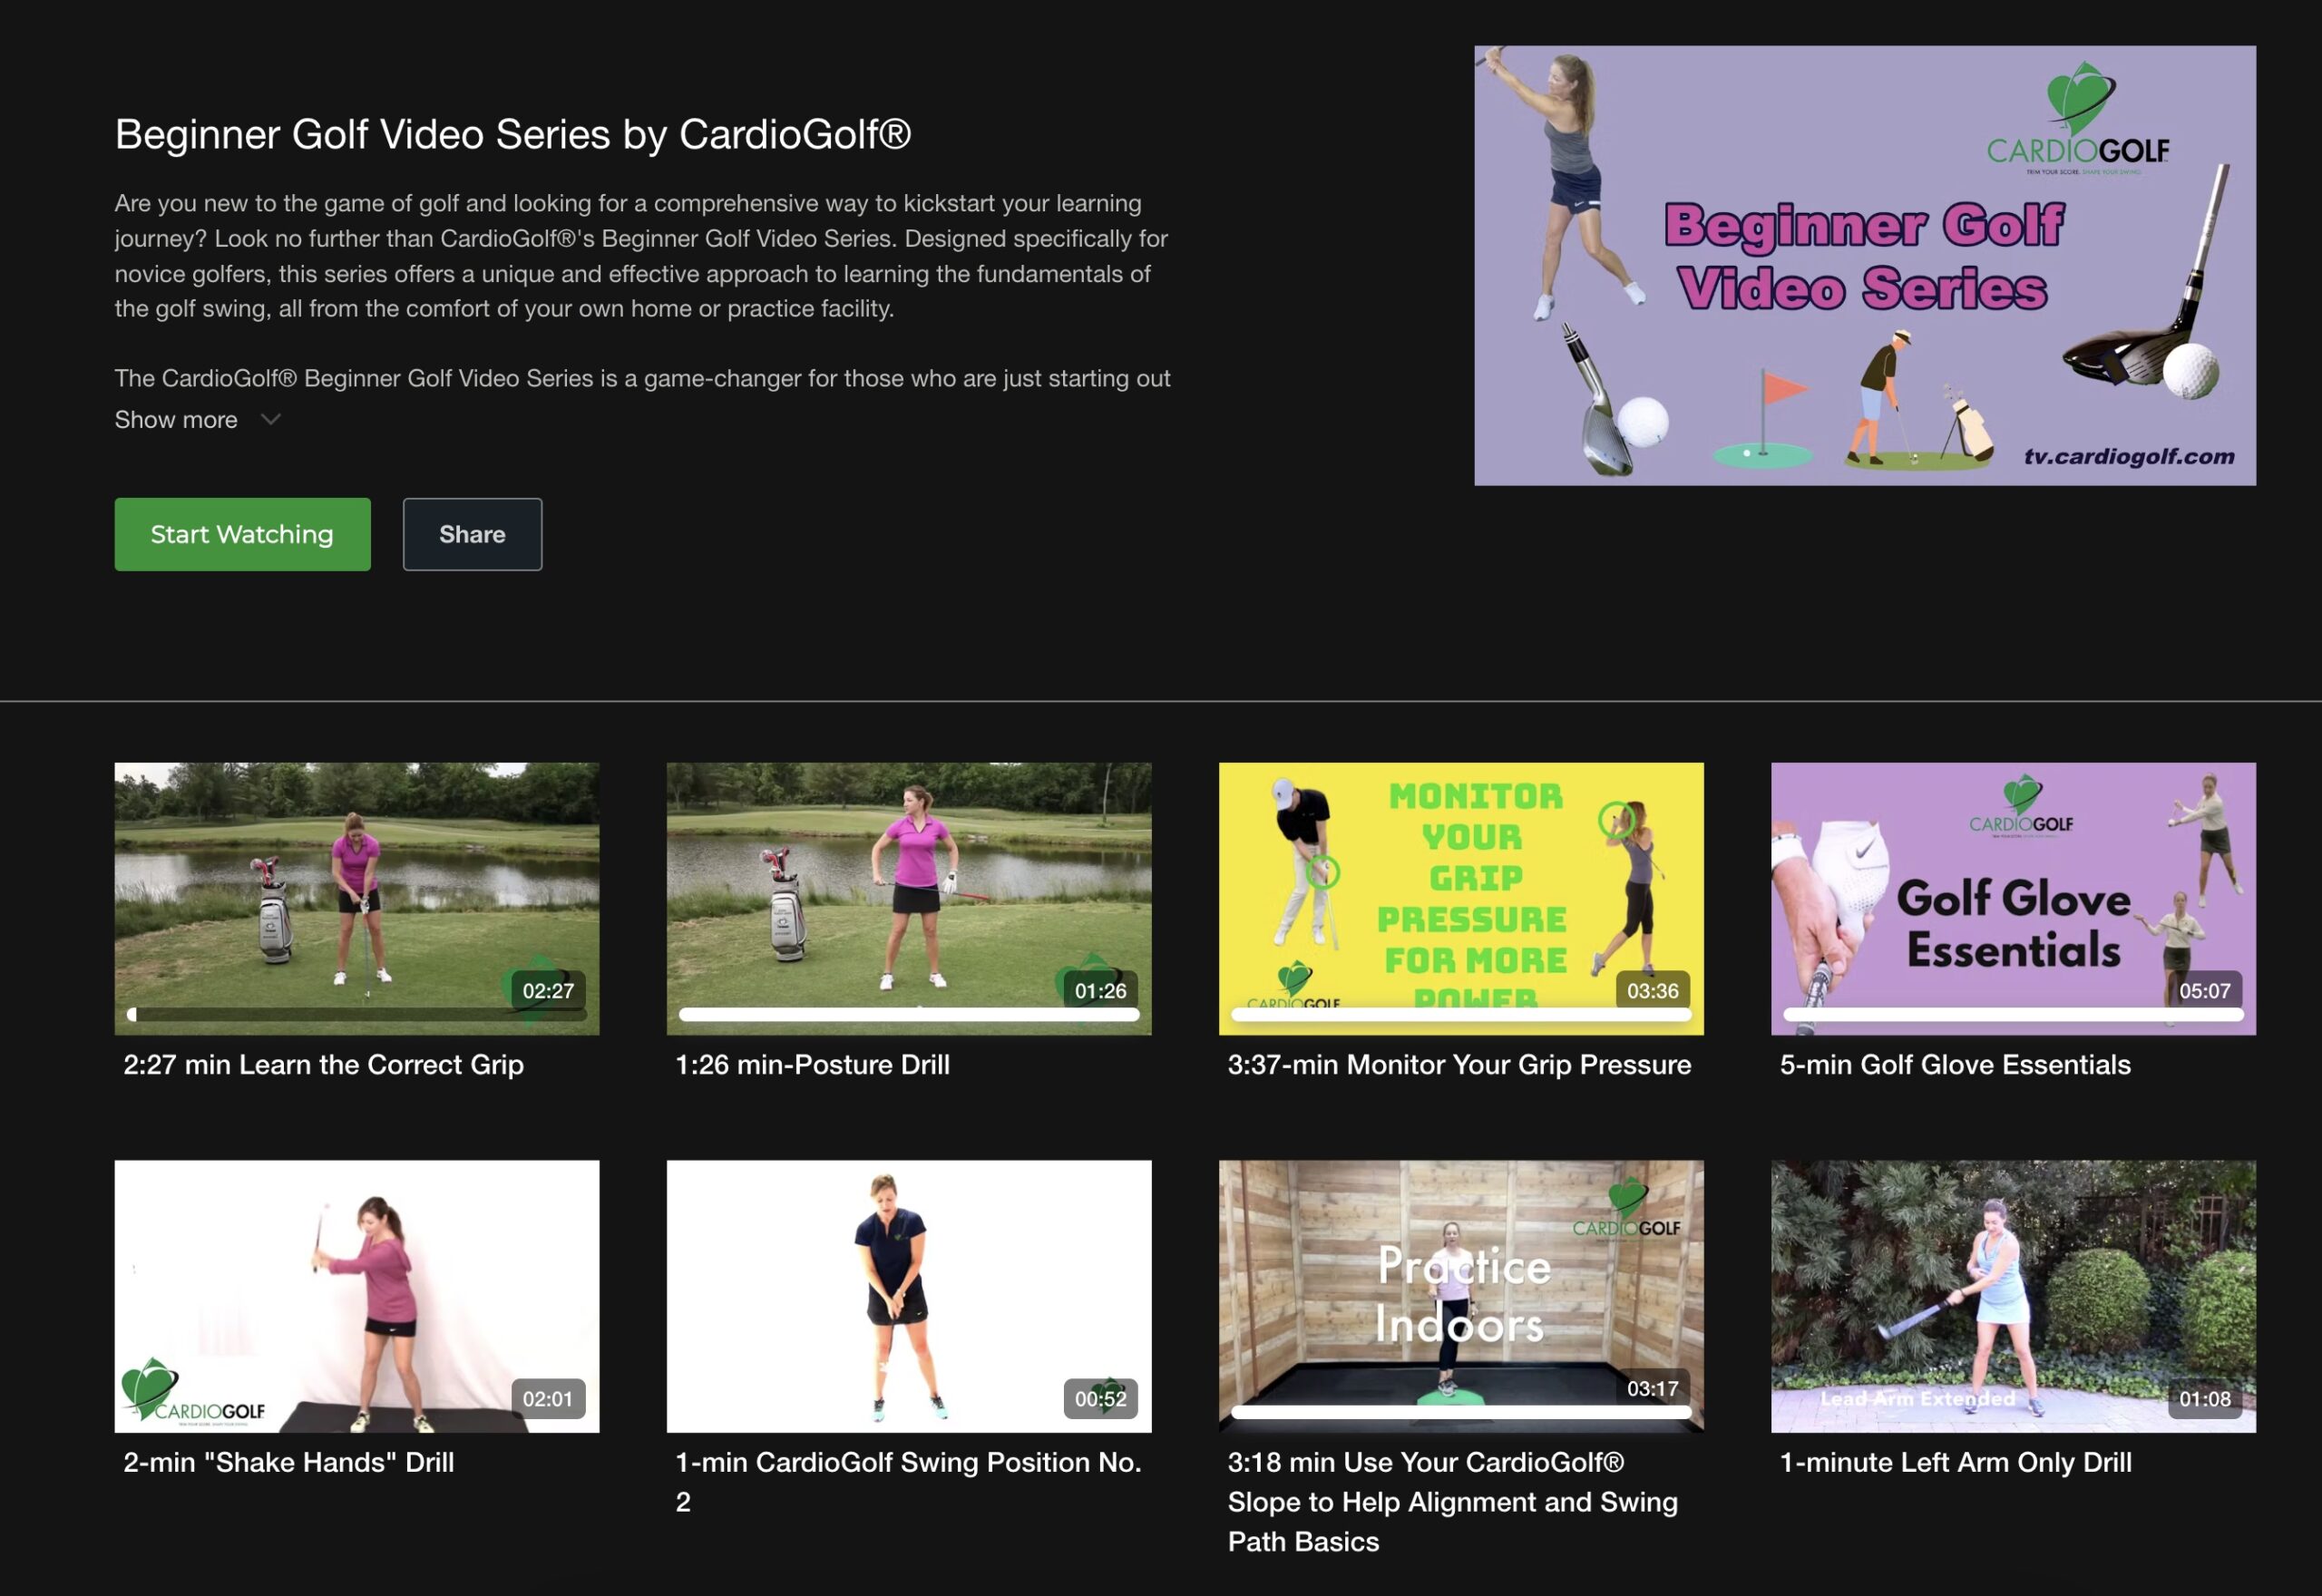 A New Way to Practice-Video Series for Beginner Golfers by CardioGolf® includes videos to help golfers accelerate the learning process. Simply follow the videos to learn proper technique and a flowing swing.